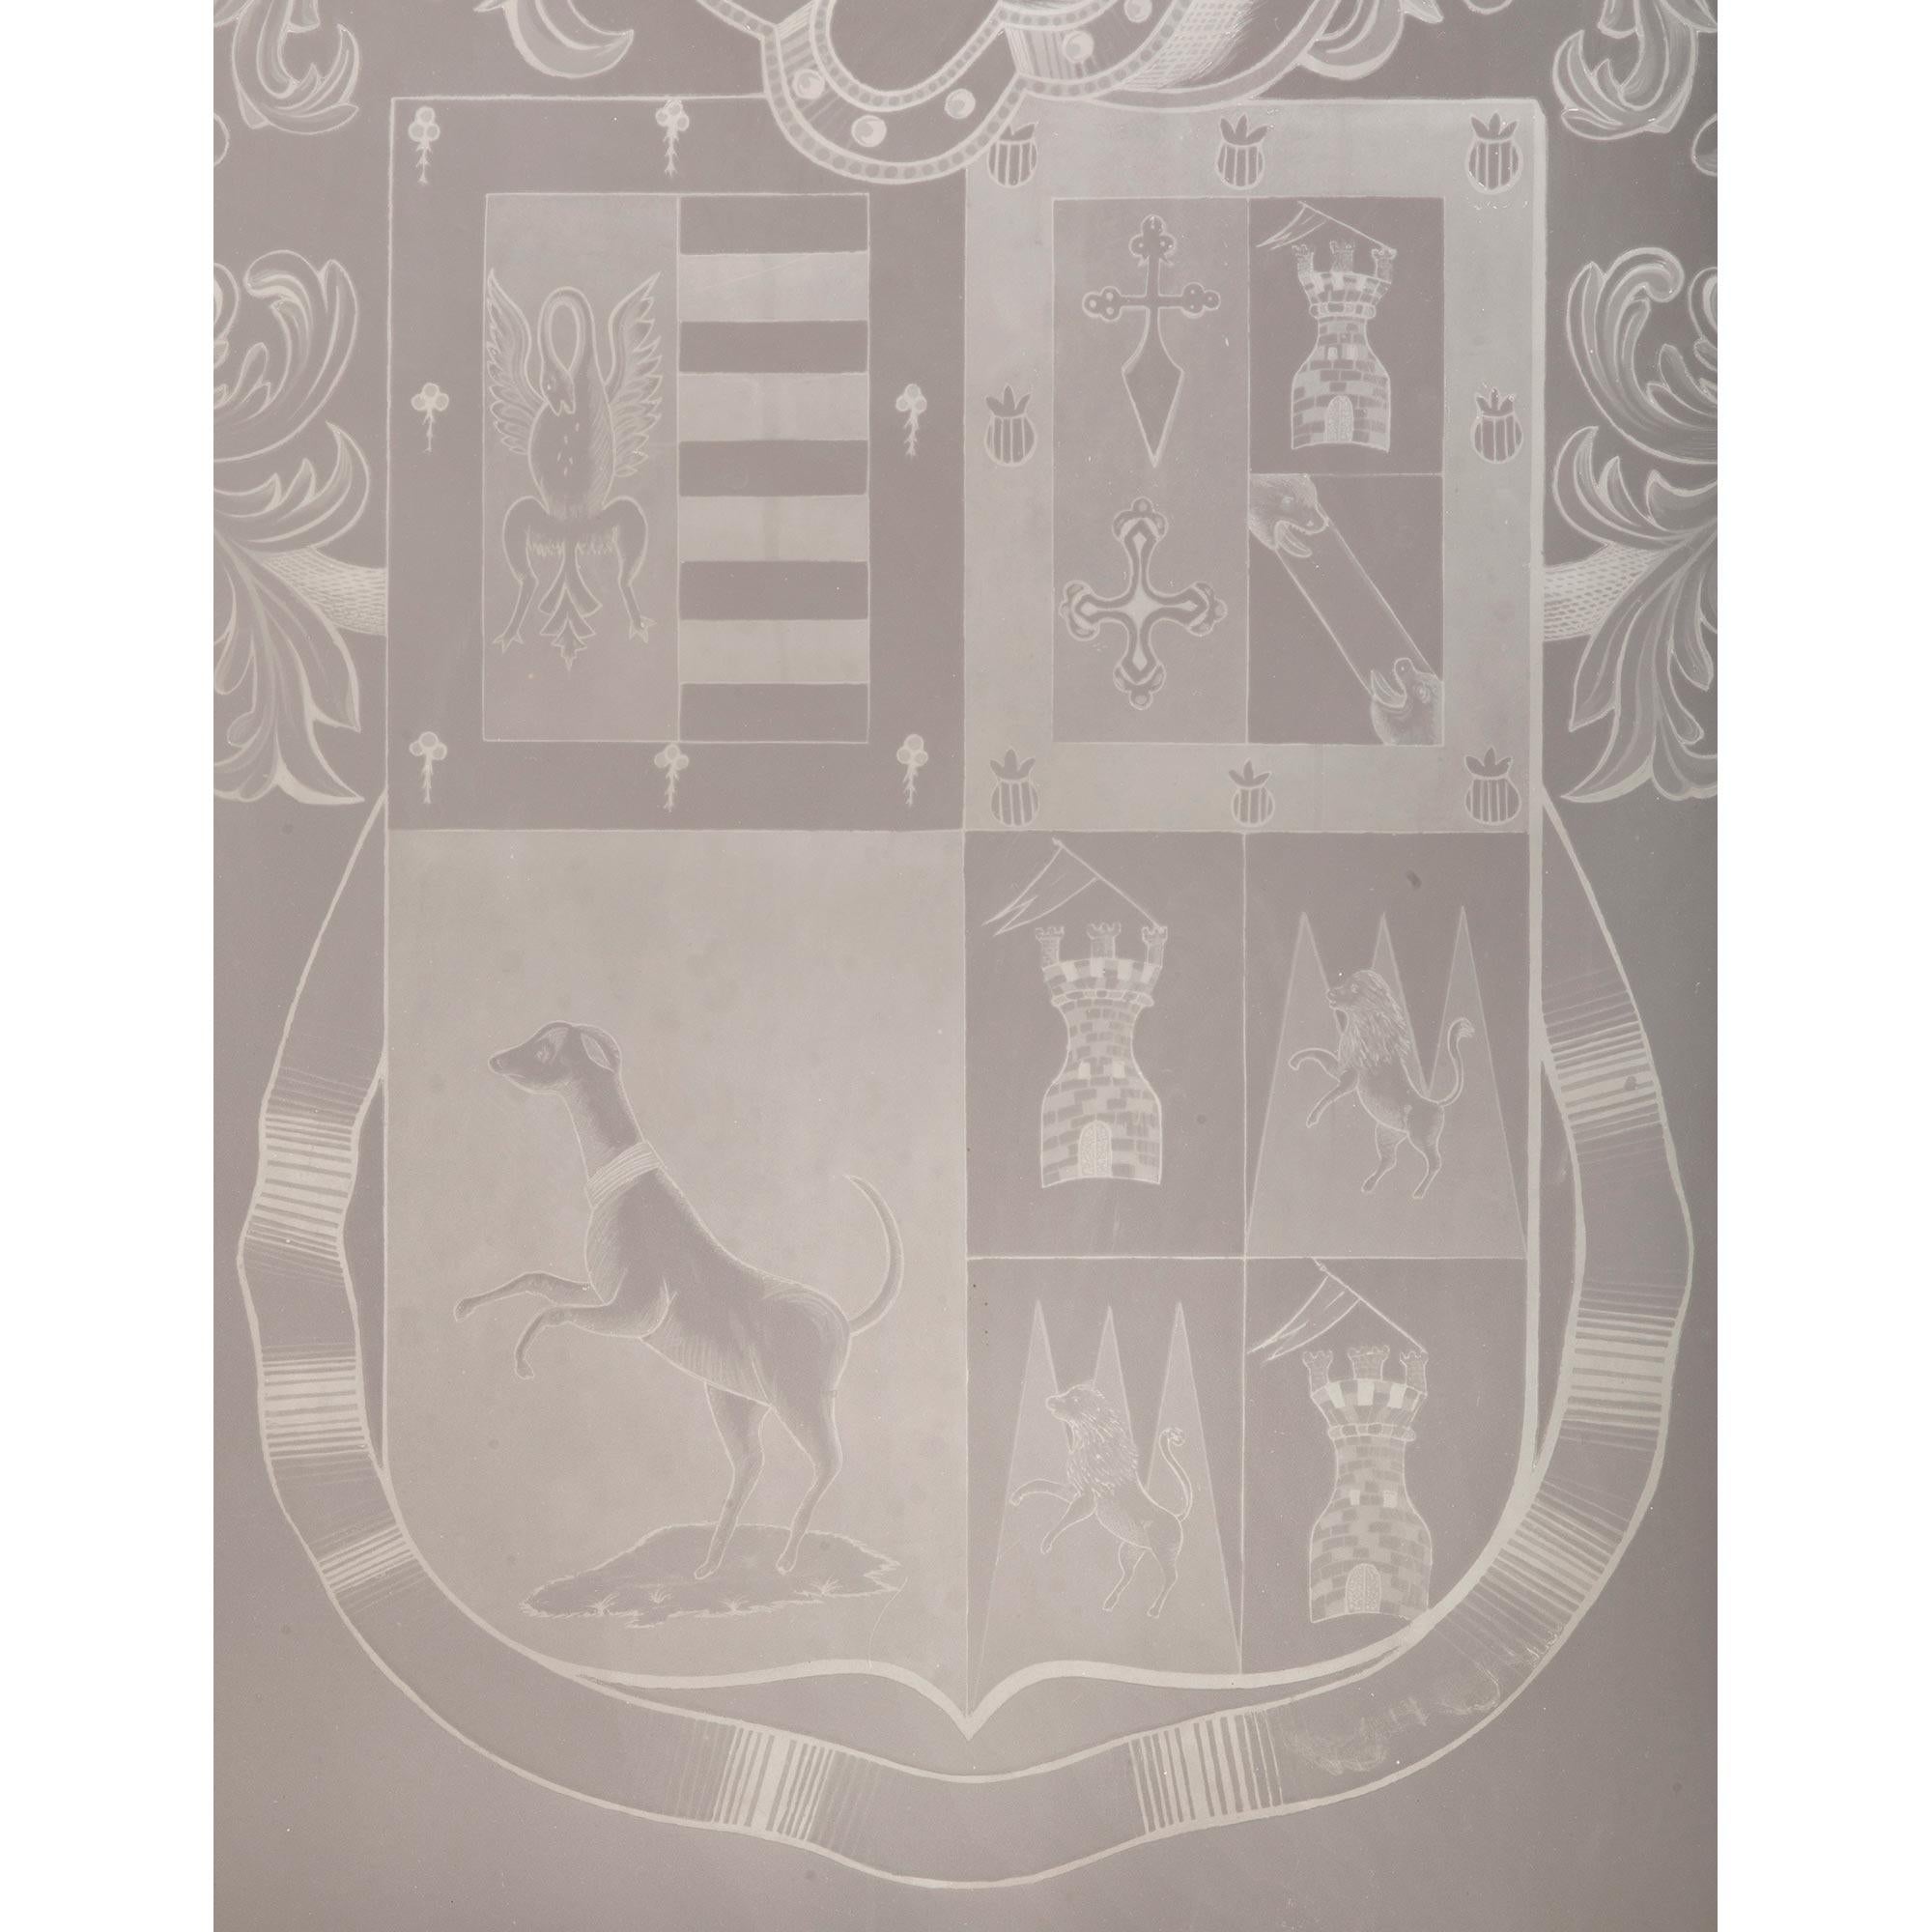 Italian 19th Century Etched Glass Family Crest Signed J. Prat. Colon 7 For Sale 2